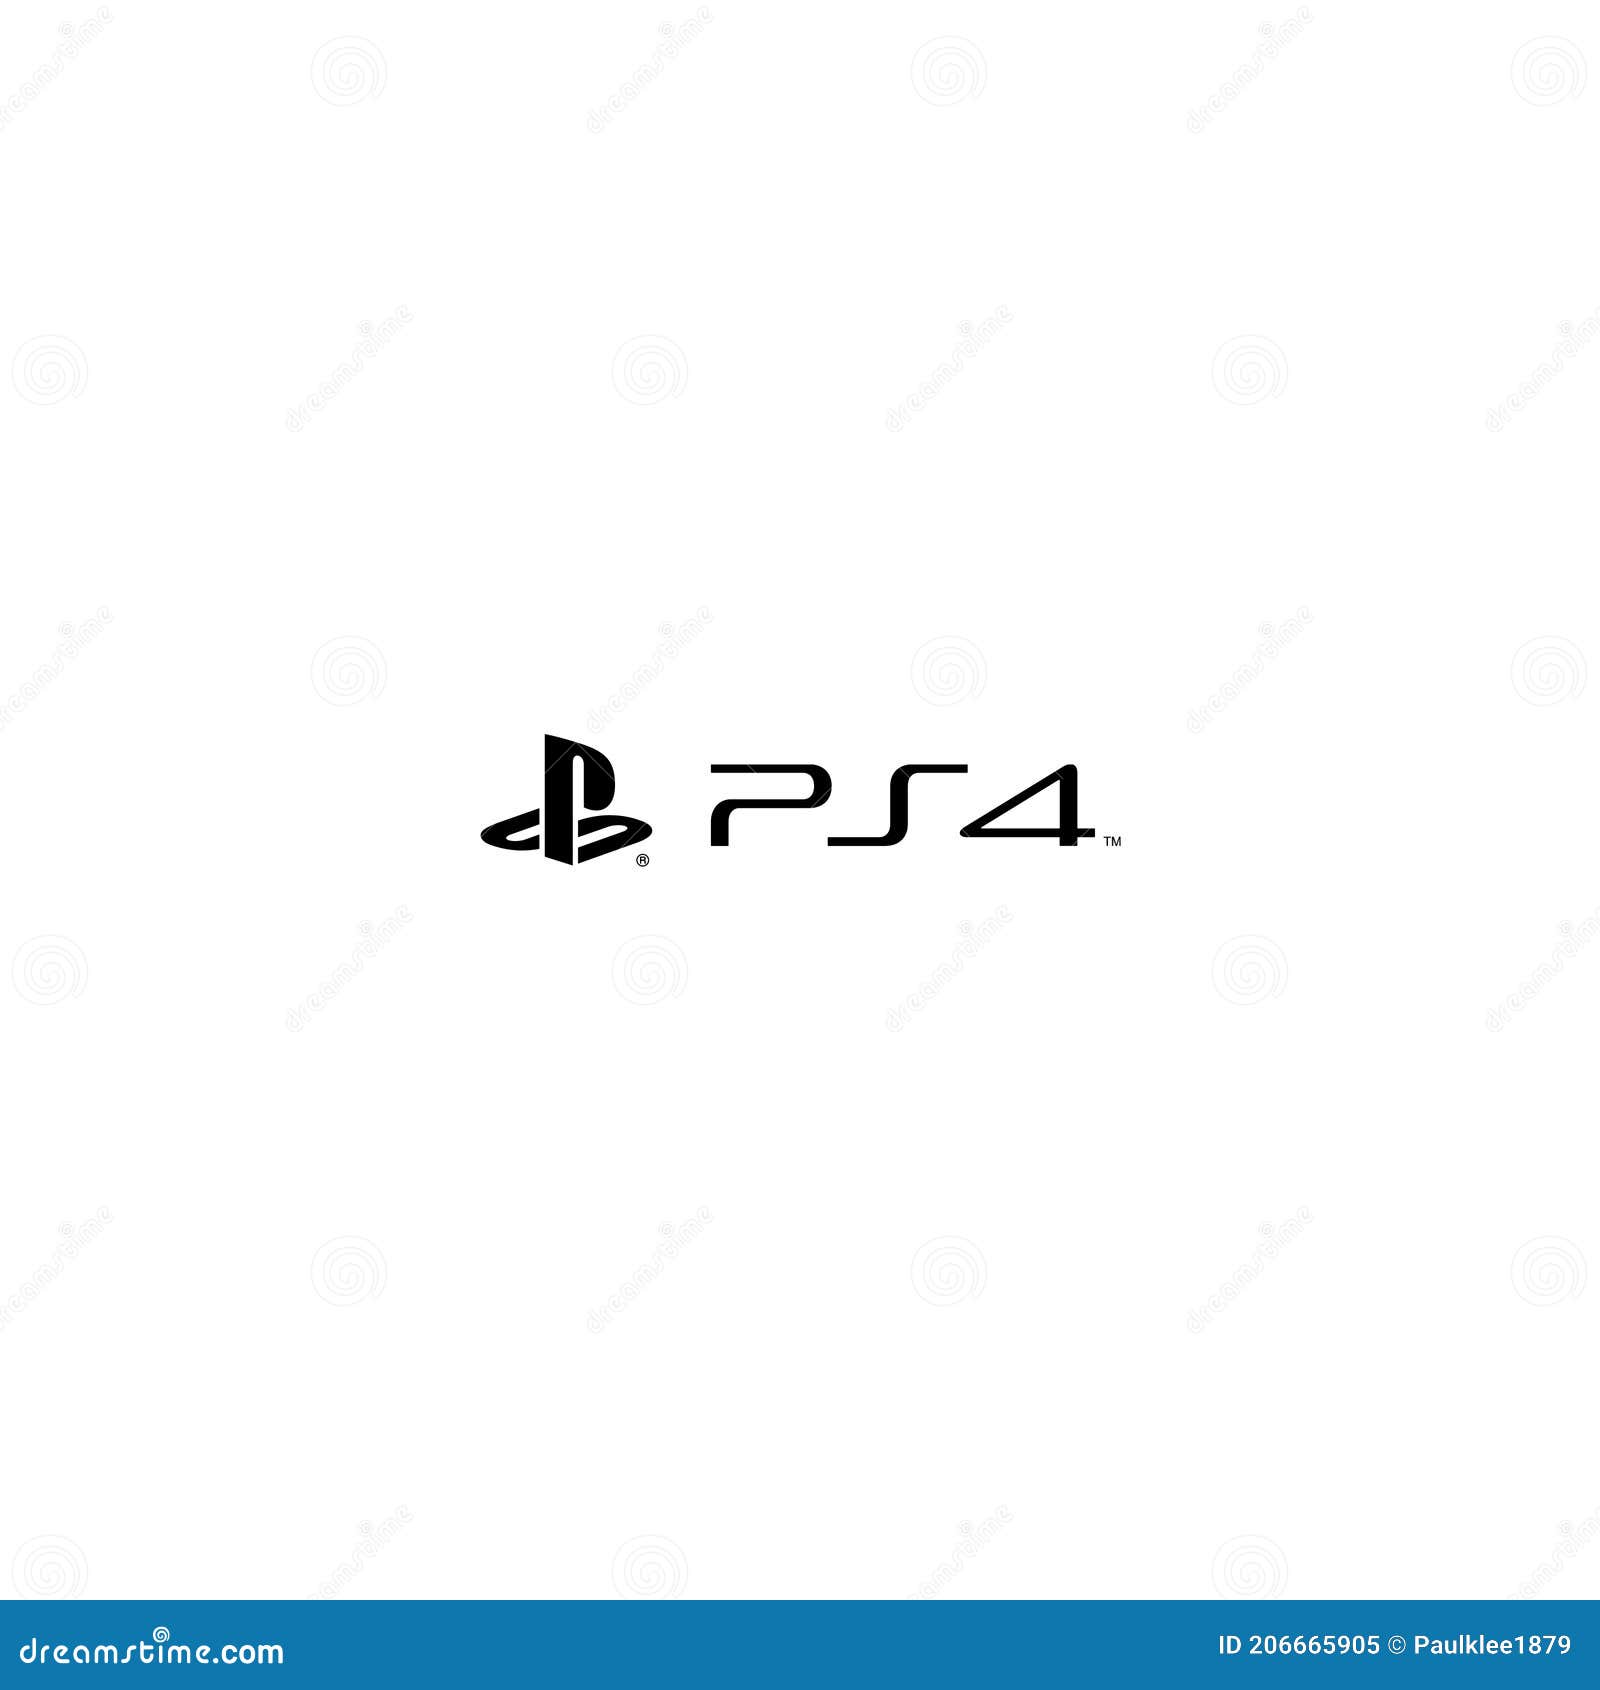 Ps4 Logo Vector On White Background Editorial Image Illustration Of Button Sony